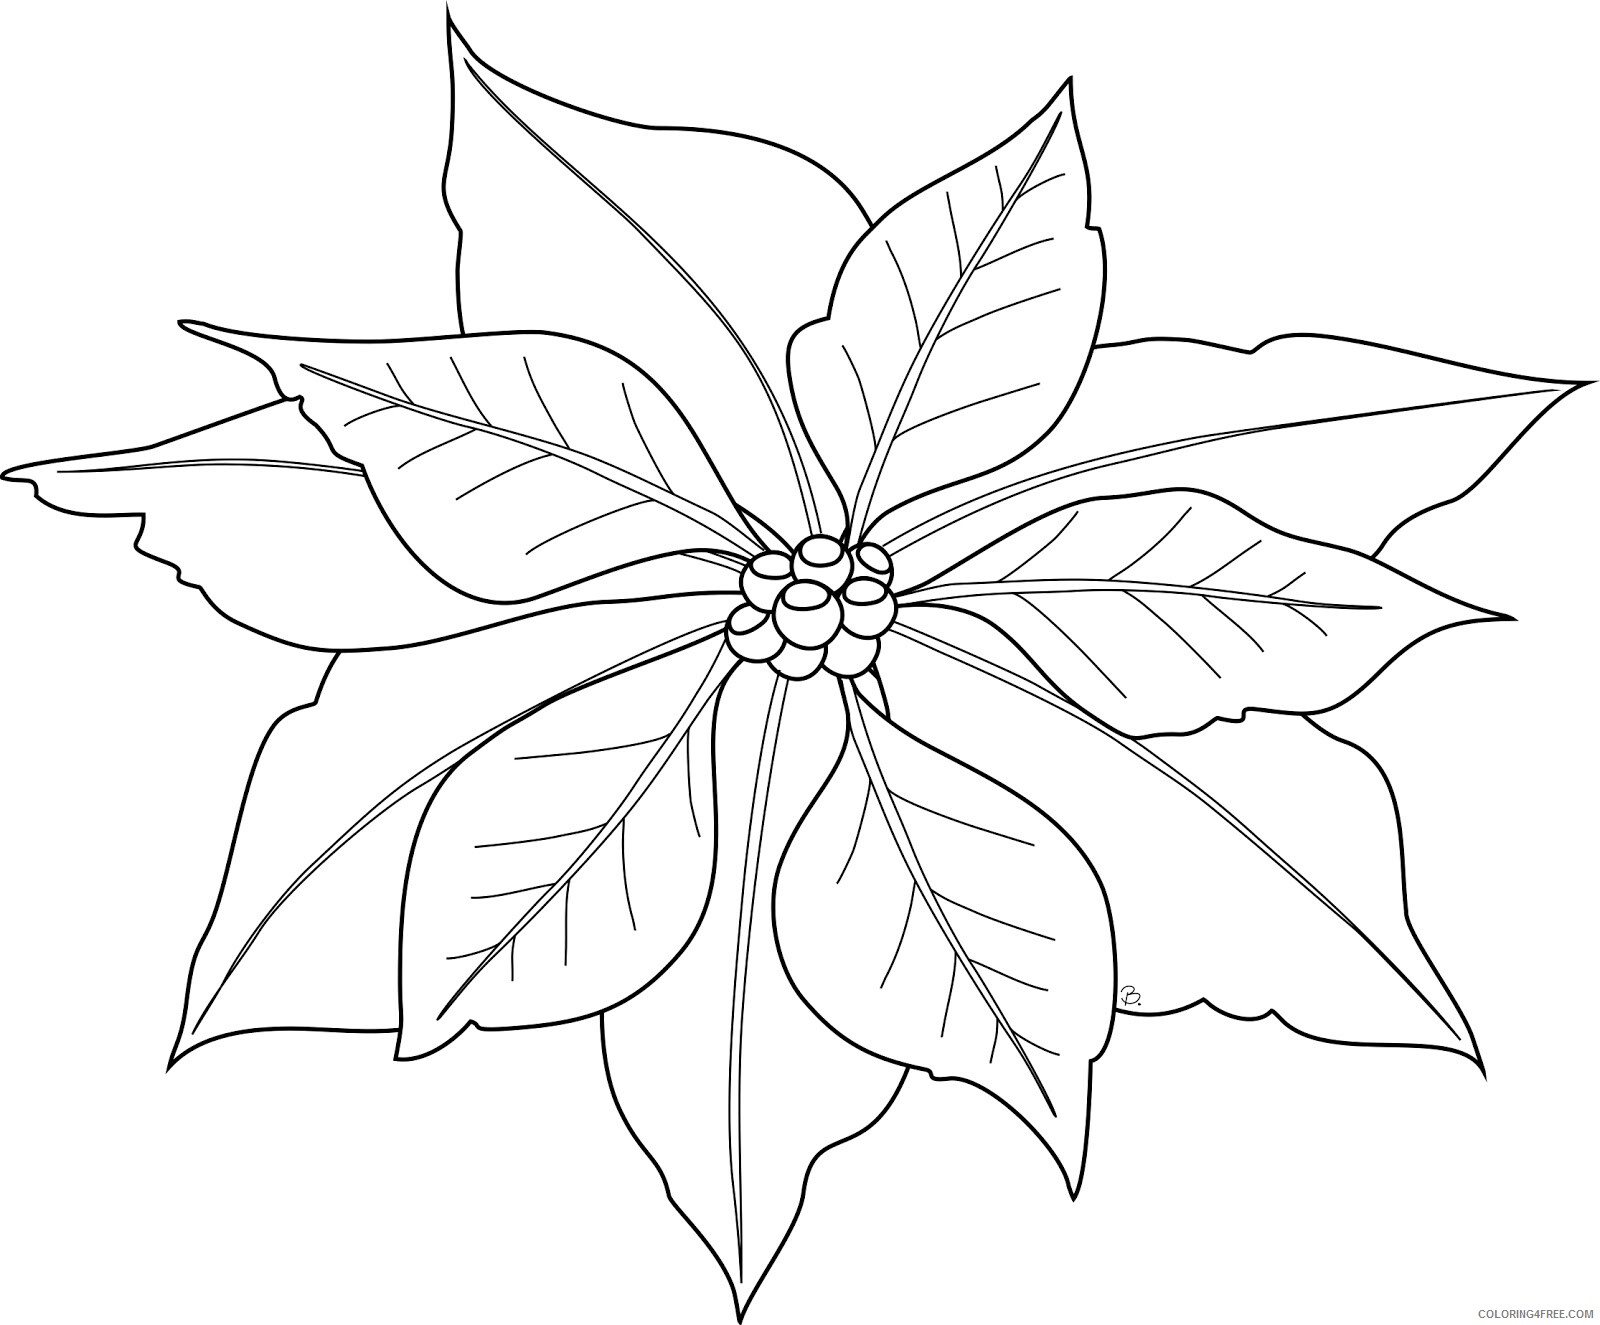 Poinsettia Coloring Pages Flowers Nature Poinsettia For Kids Printable 2021 309 Coloring4free